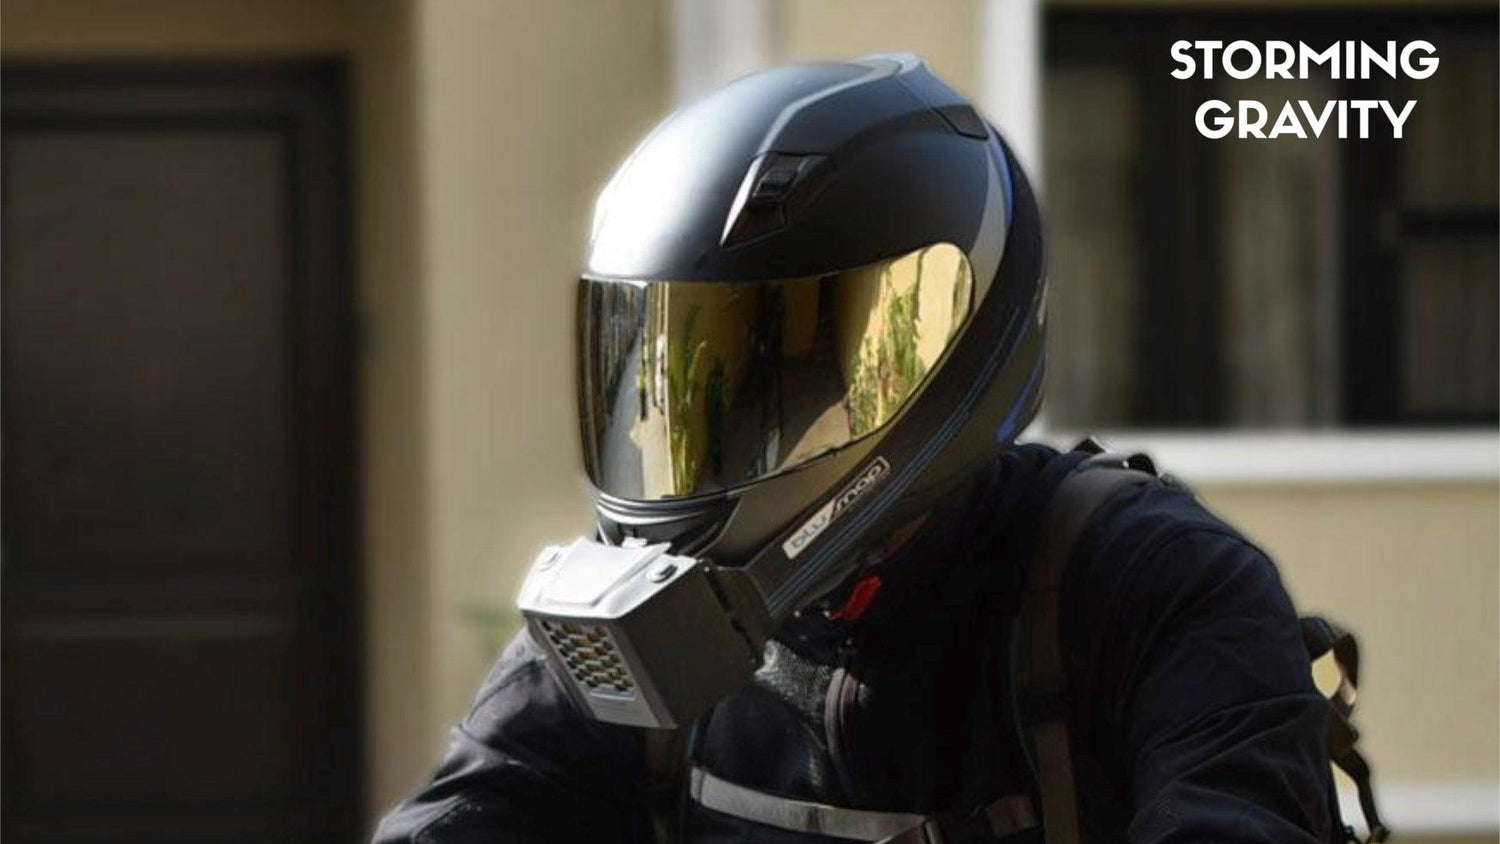 BluSnap helmet - A life saver for motorcyclist that cool down your face - Storming Gravity